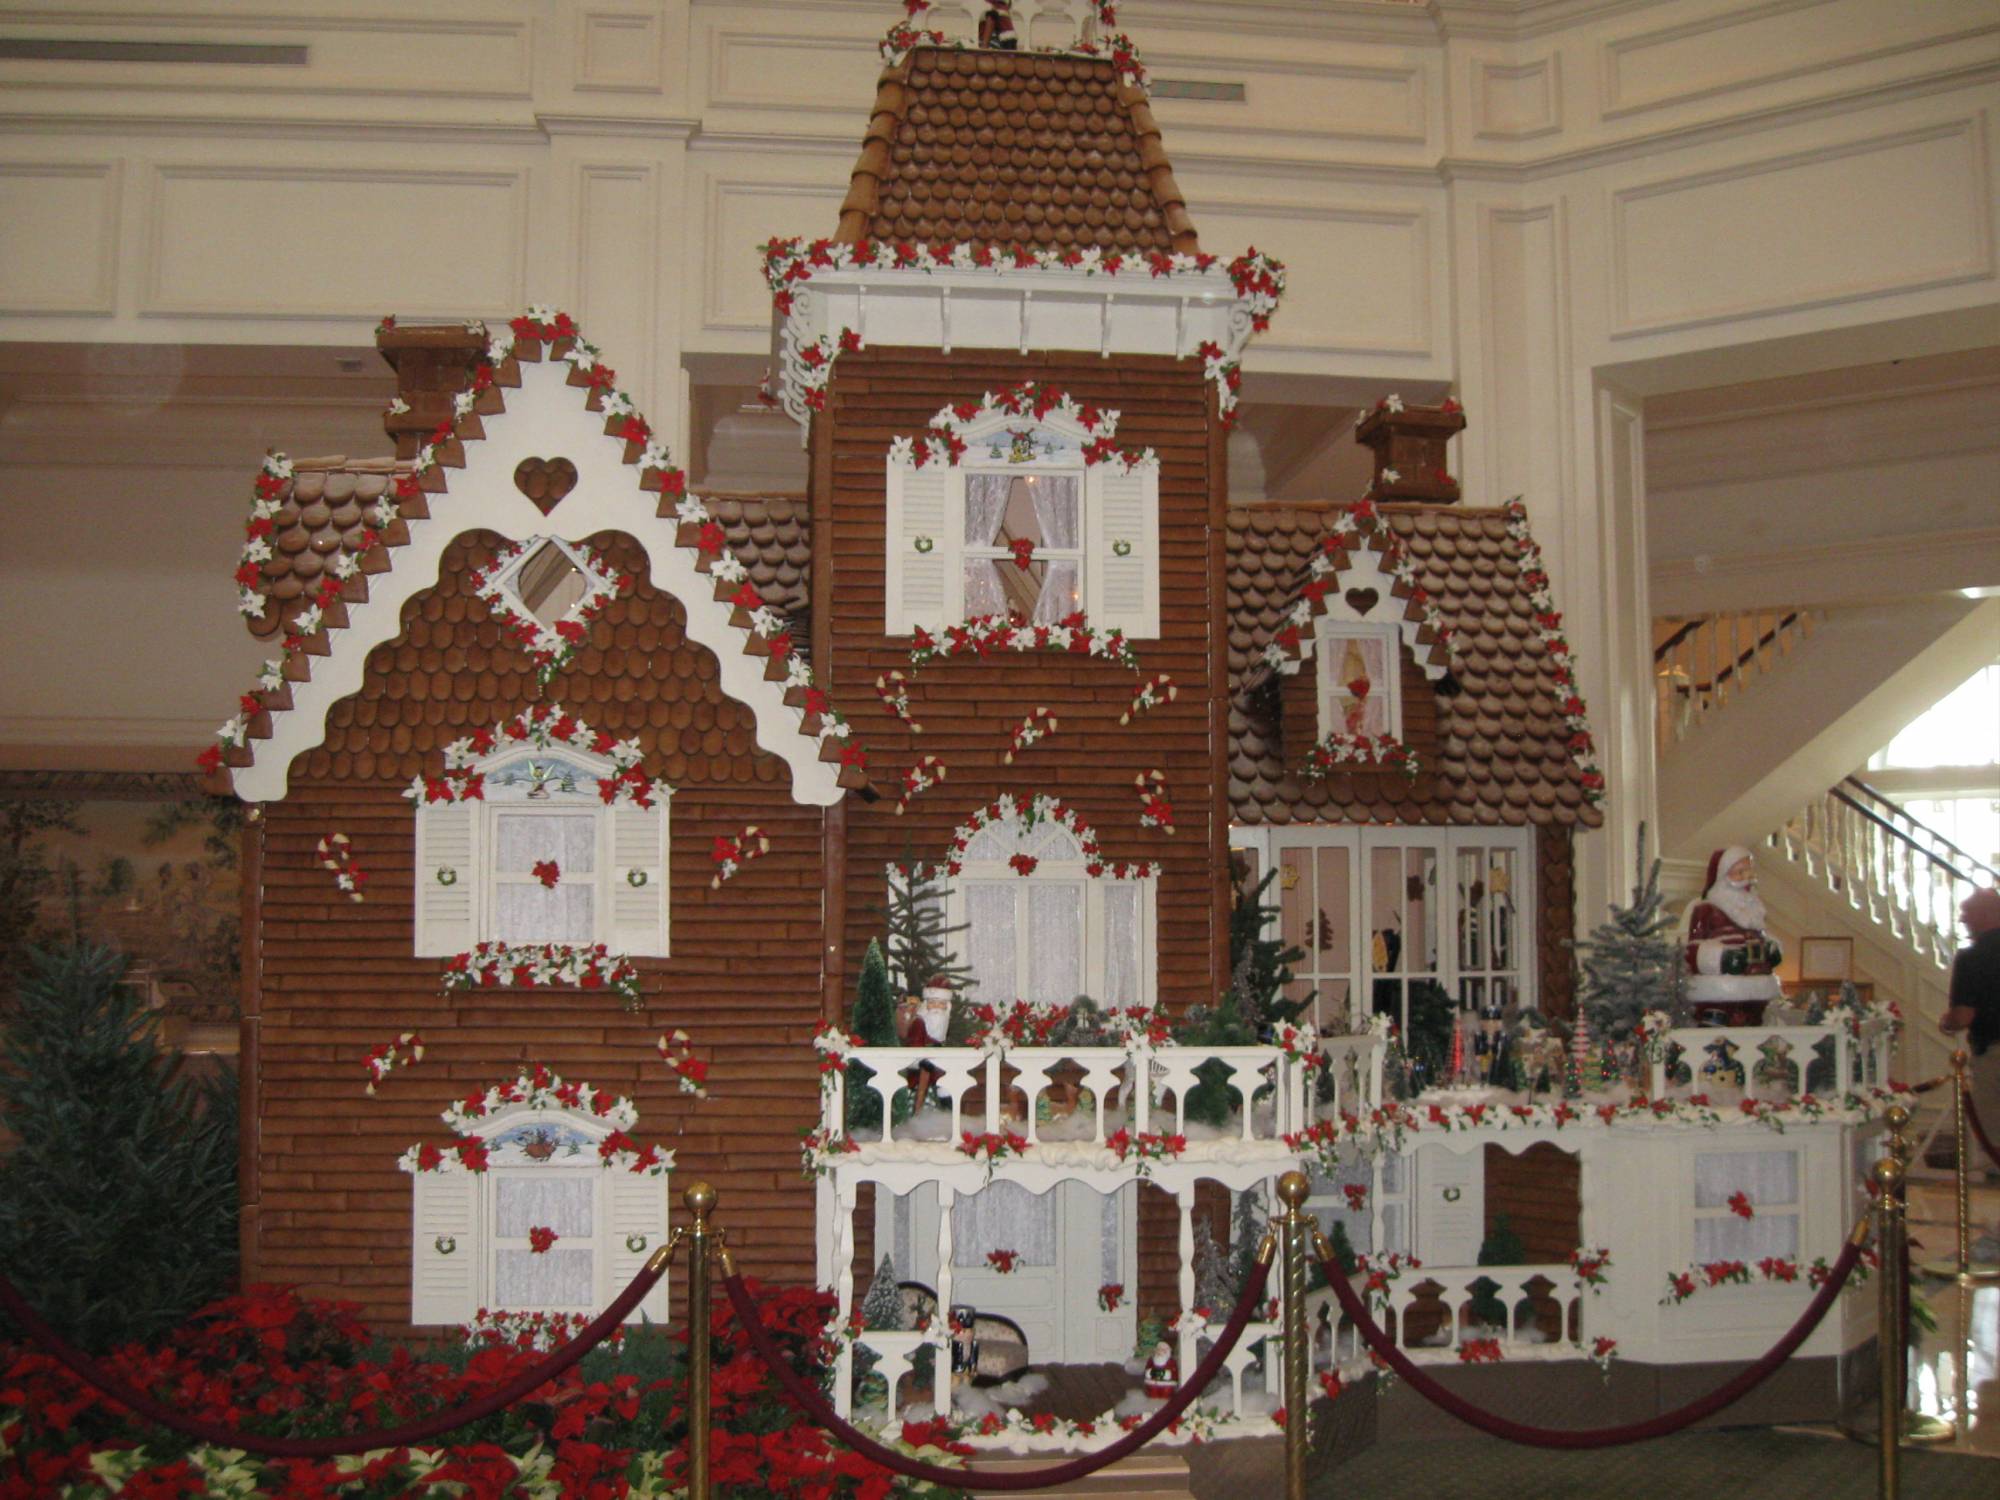 Grand Floridian - The Famous Gingerbread House